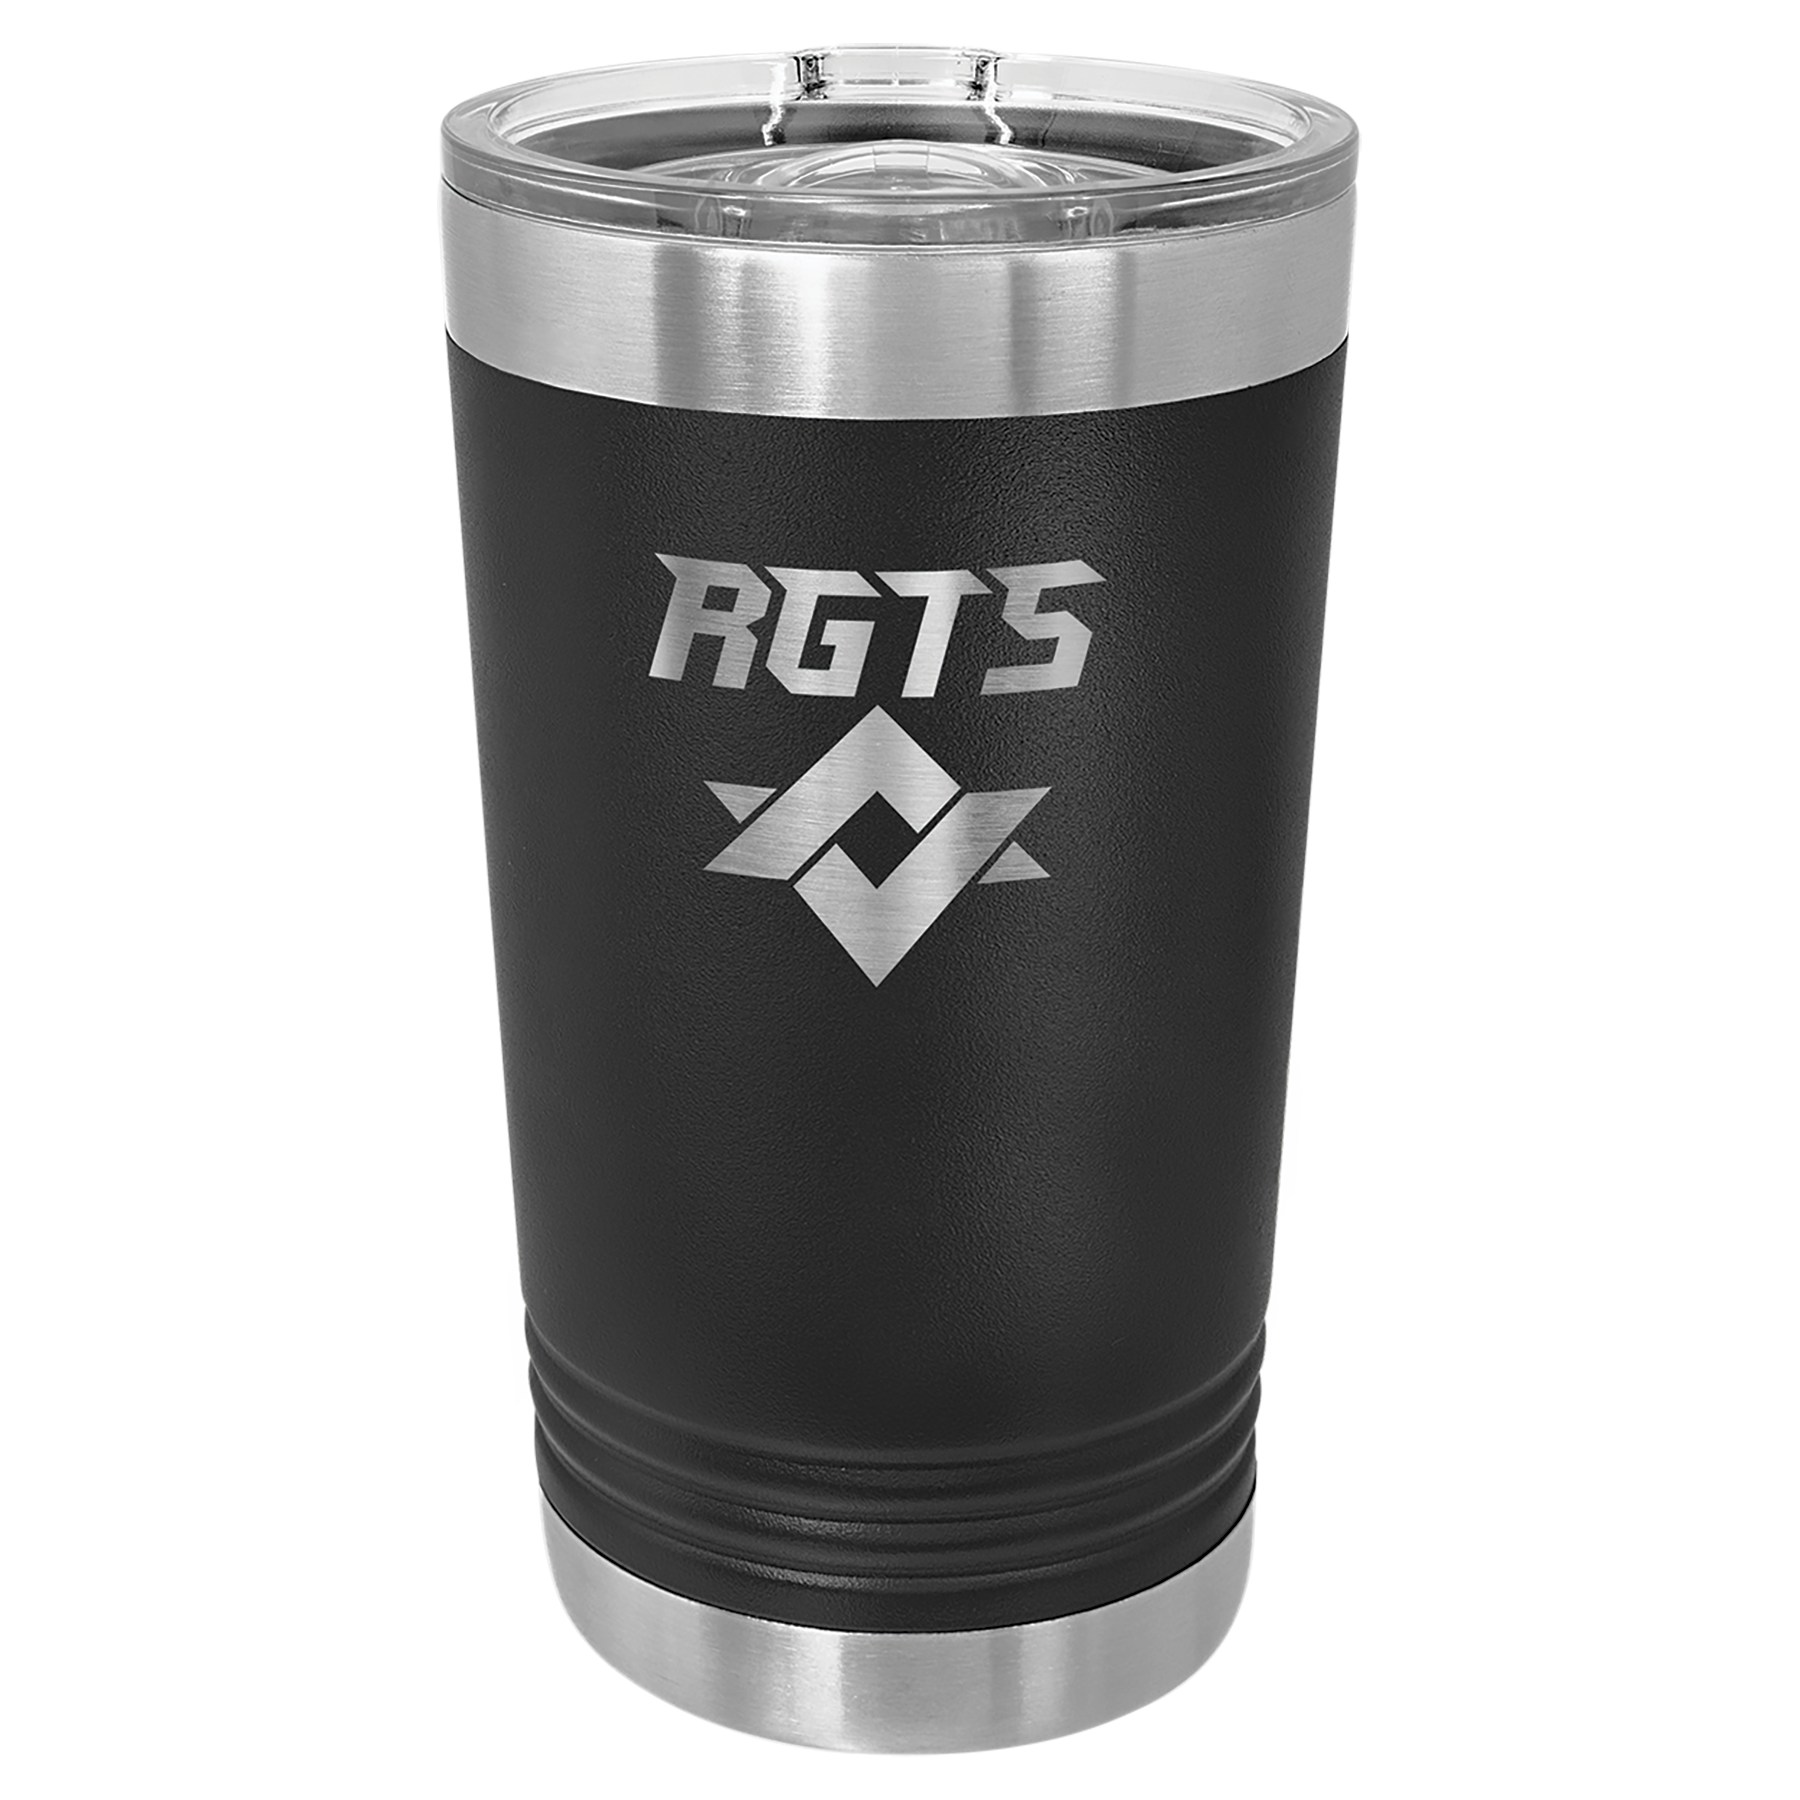 REAL YETI 18 Oz. Laser Engraved White Stainless Steel Yeti With